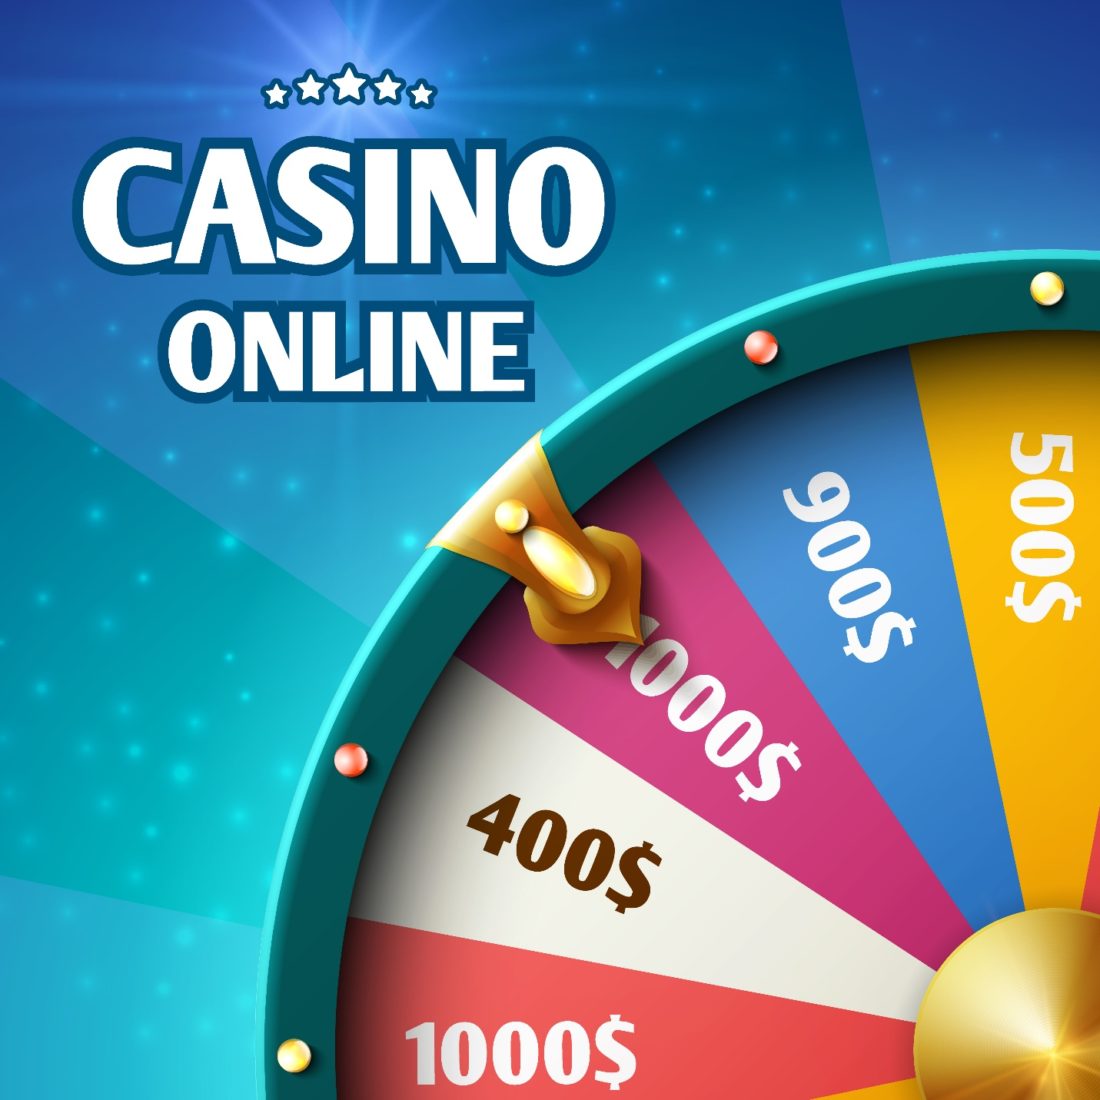 spin and win casino game